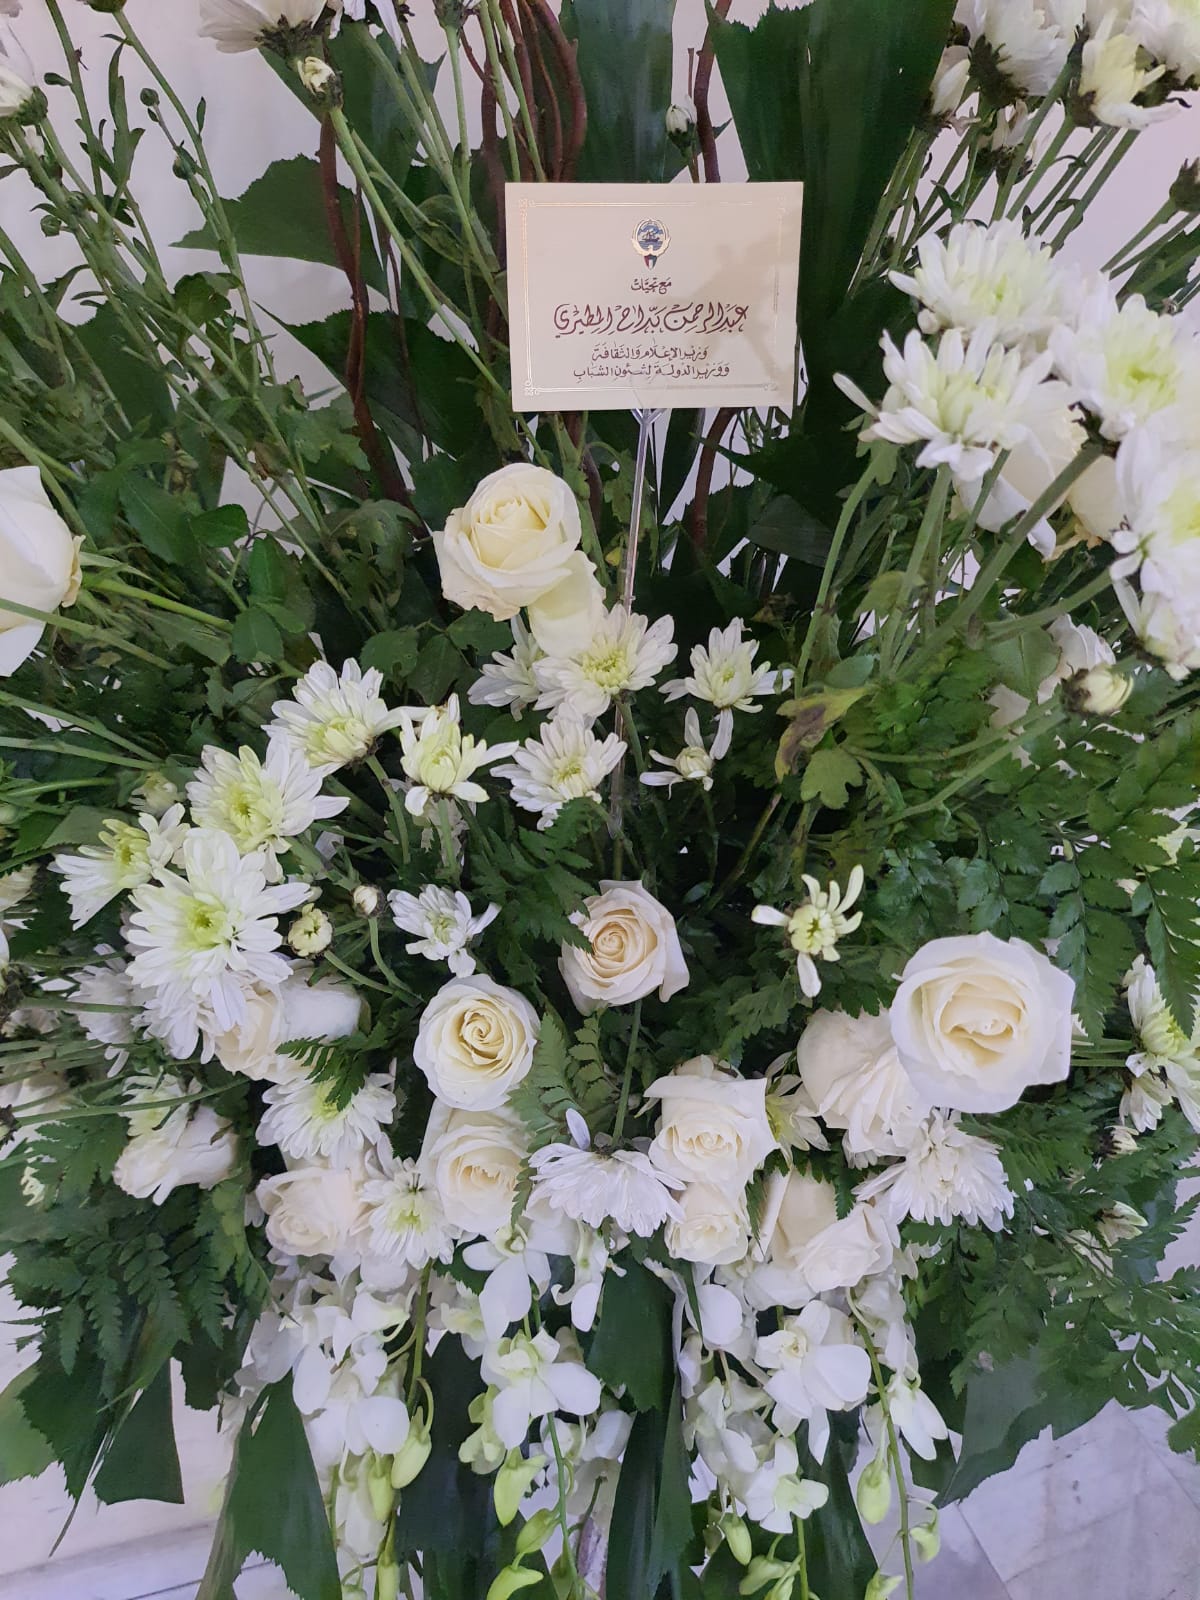 Flowers sent by Minister of Information and Culture and Minister of State for Youth Affairs Abdulrahman Al-Mutairi.n